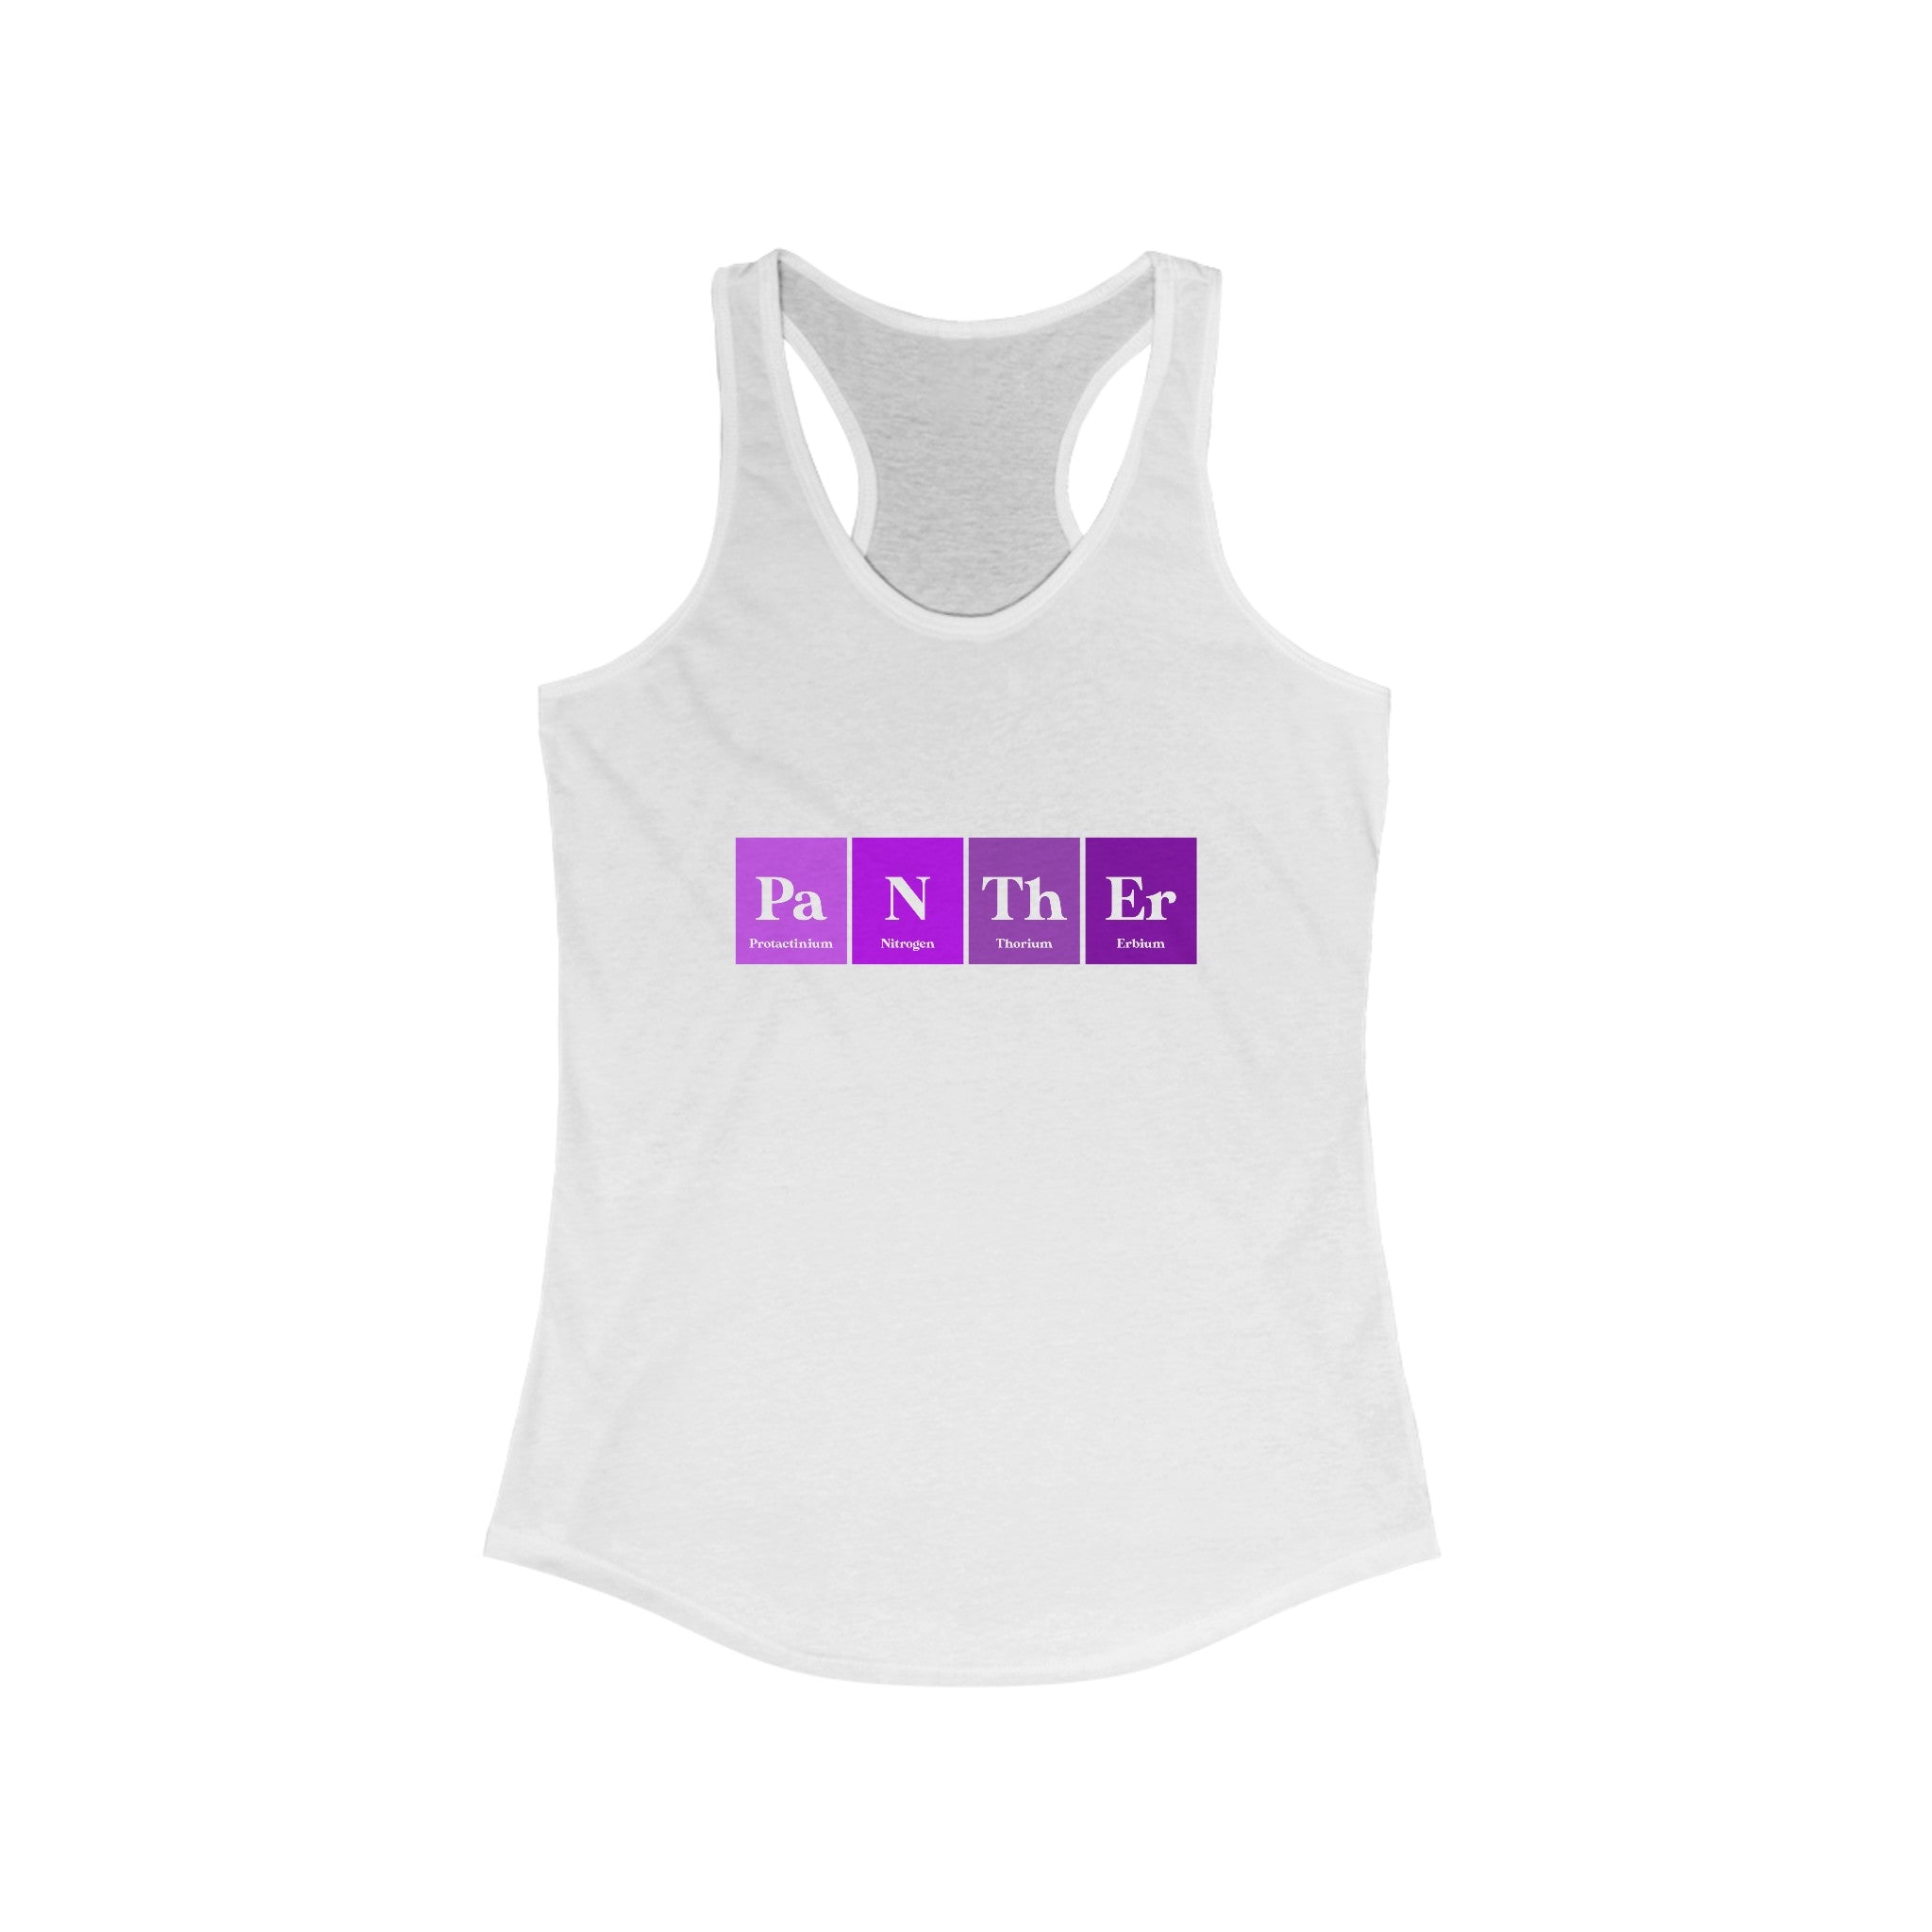 Pa-N-Th-Er - Women's Racerback Tank featuring a white sleeveless top with purple squares displaying "Pa," "N," and "Th," "Er" in the style of the periodic table, spelling out “Panther.” This fitness top is perfect for showing off your unique Pa-N-Th-Er designs at the gym or on a run.